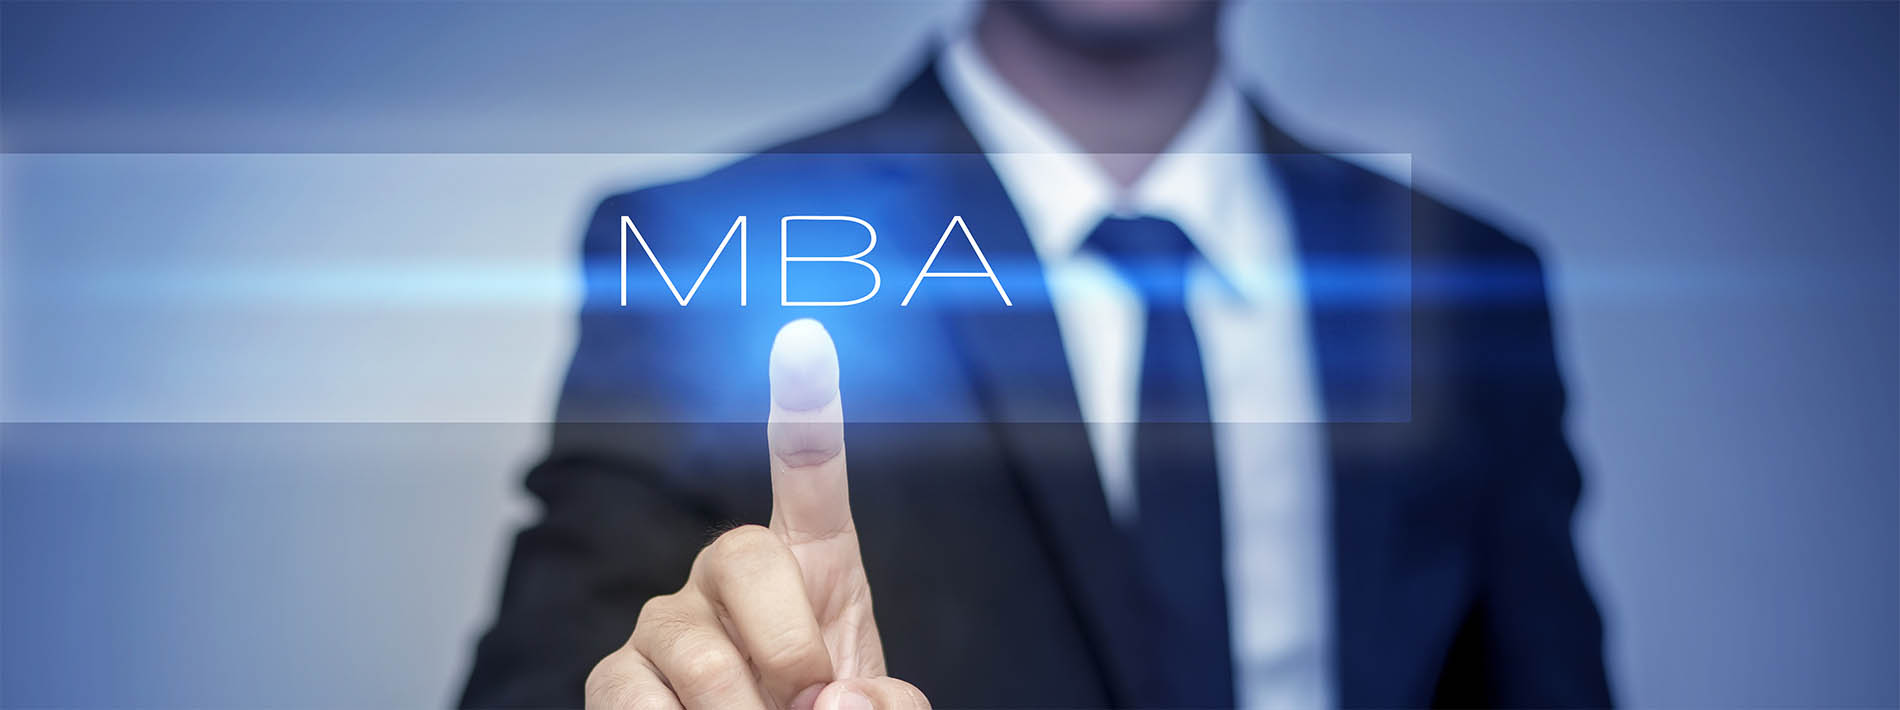 MBA Coaching Program in Austin, TX | Savage Consulting Group